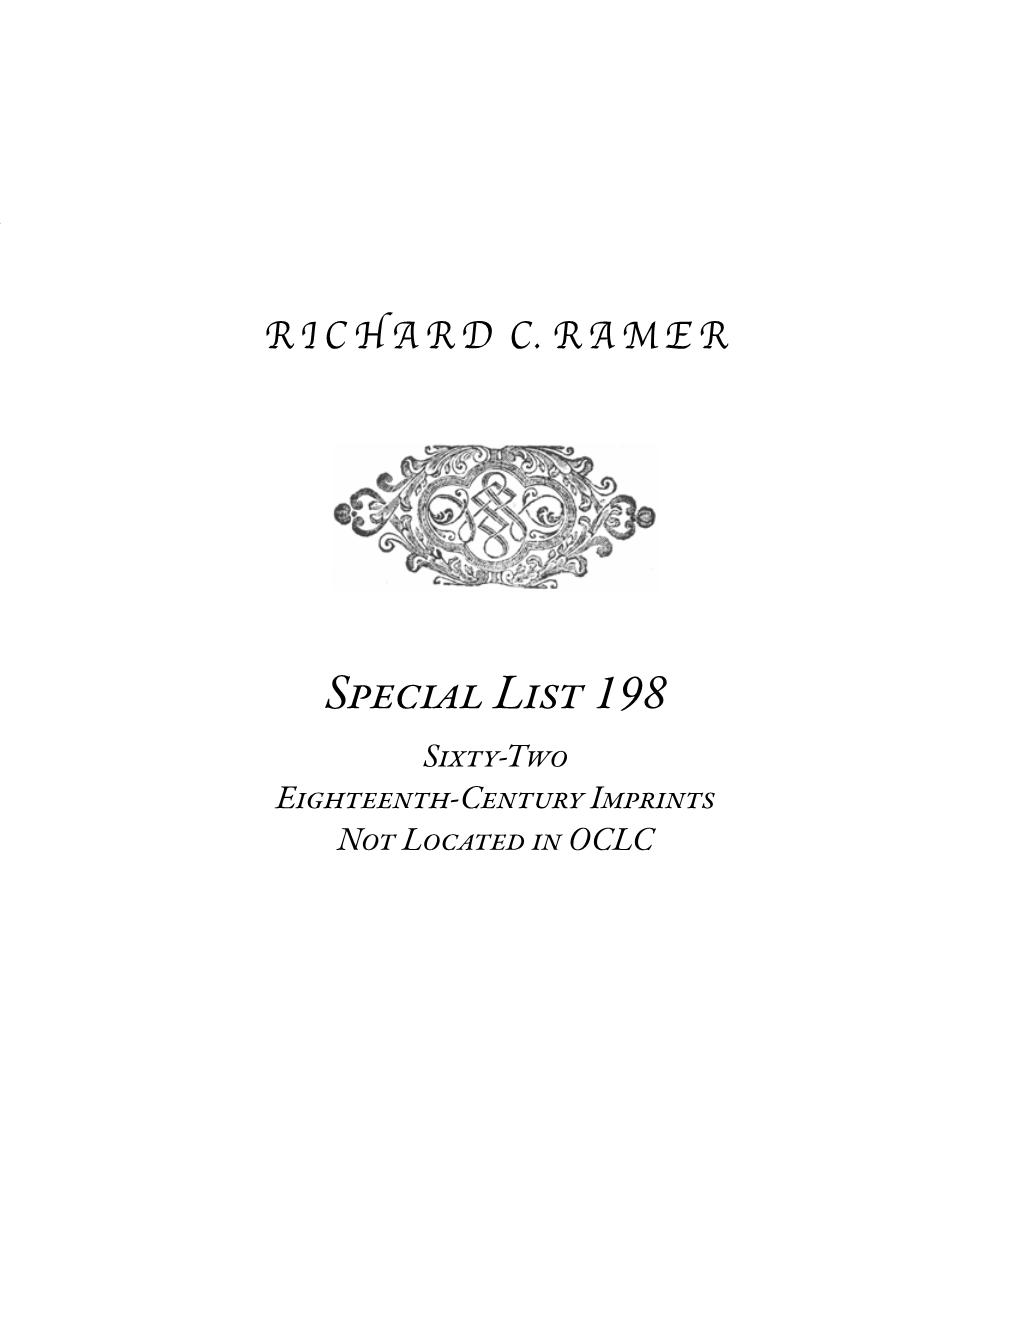 Special List 198 1